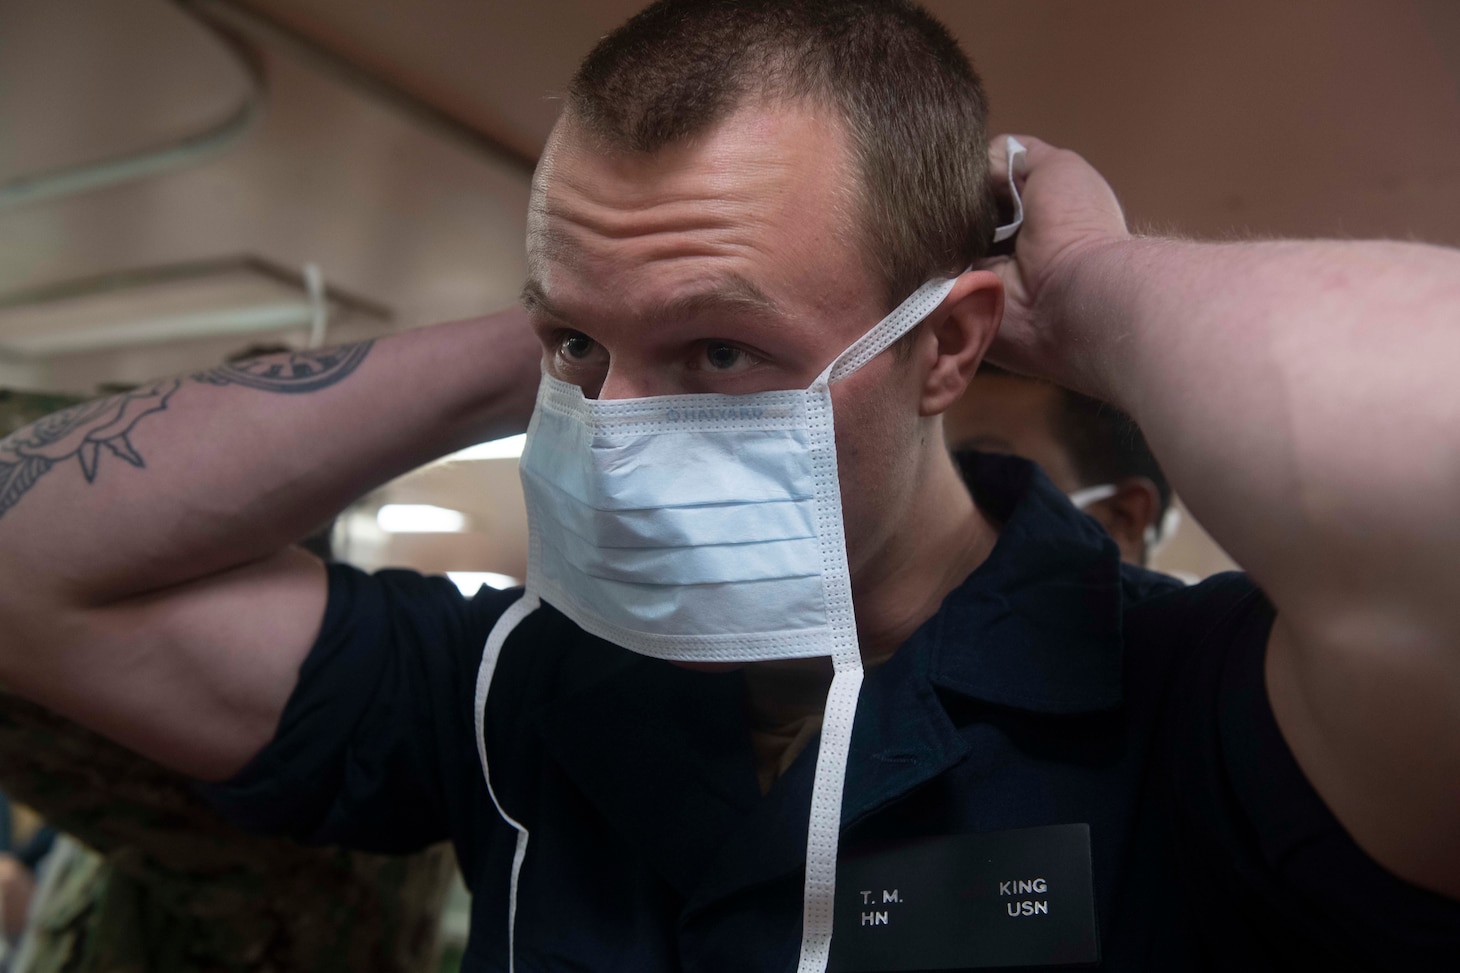 Hospitalman Thomas King dons a surgical mask during patient transport drills aboard hospital ship USNS Comfort (T-AH 20) as the ship prepares to admit patients in support of the nation’s COVID-19 response efforts.